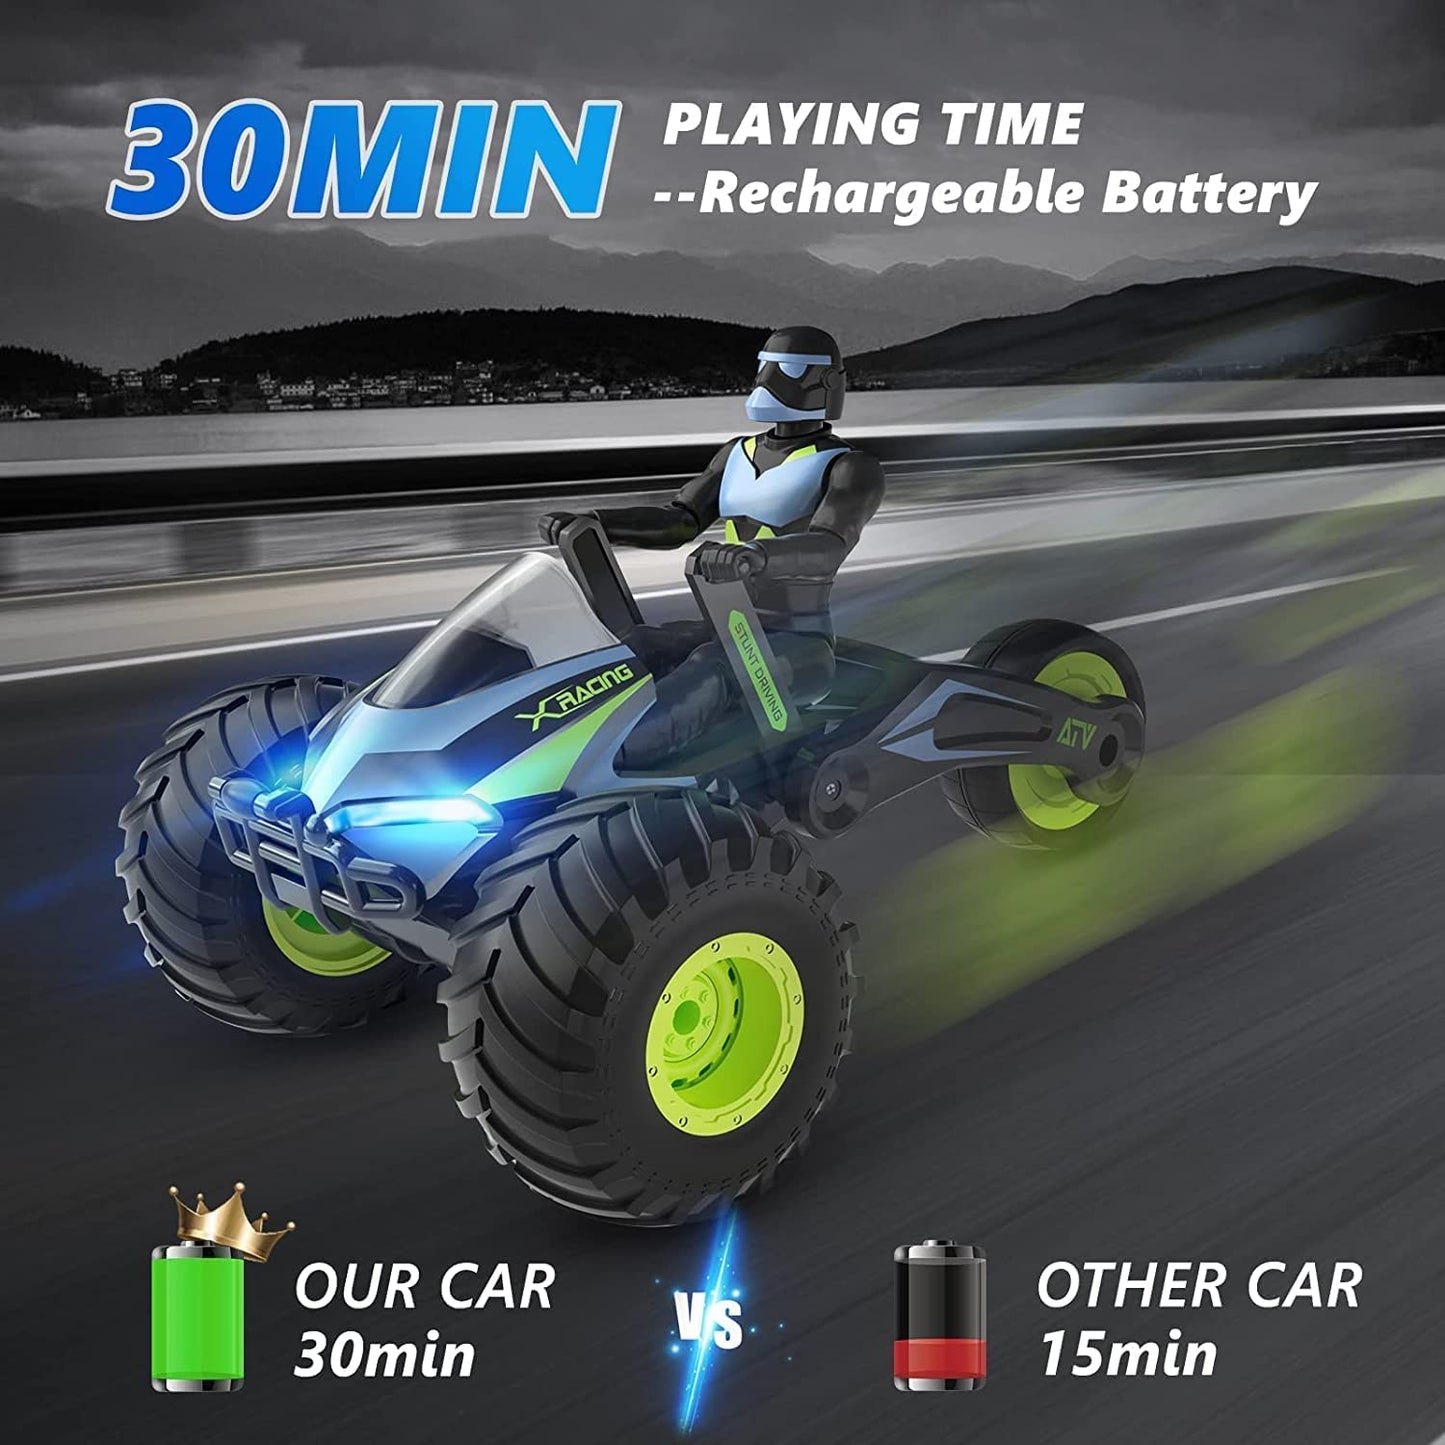 MM TOYS' R/C Stunt Racing Bike: 2.4 GHz, Dual Mode, Illuminated, Large Front Wheels, Rechargeable Batteries, One-Key Swing Mode, Extreme Stunt Performance